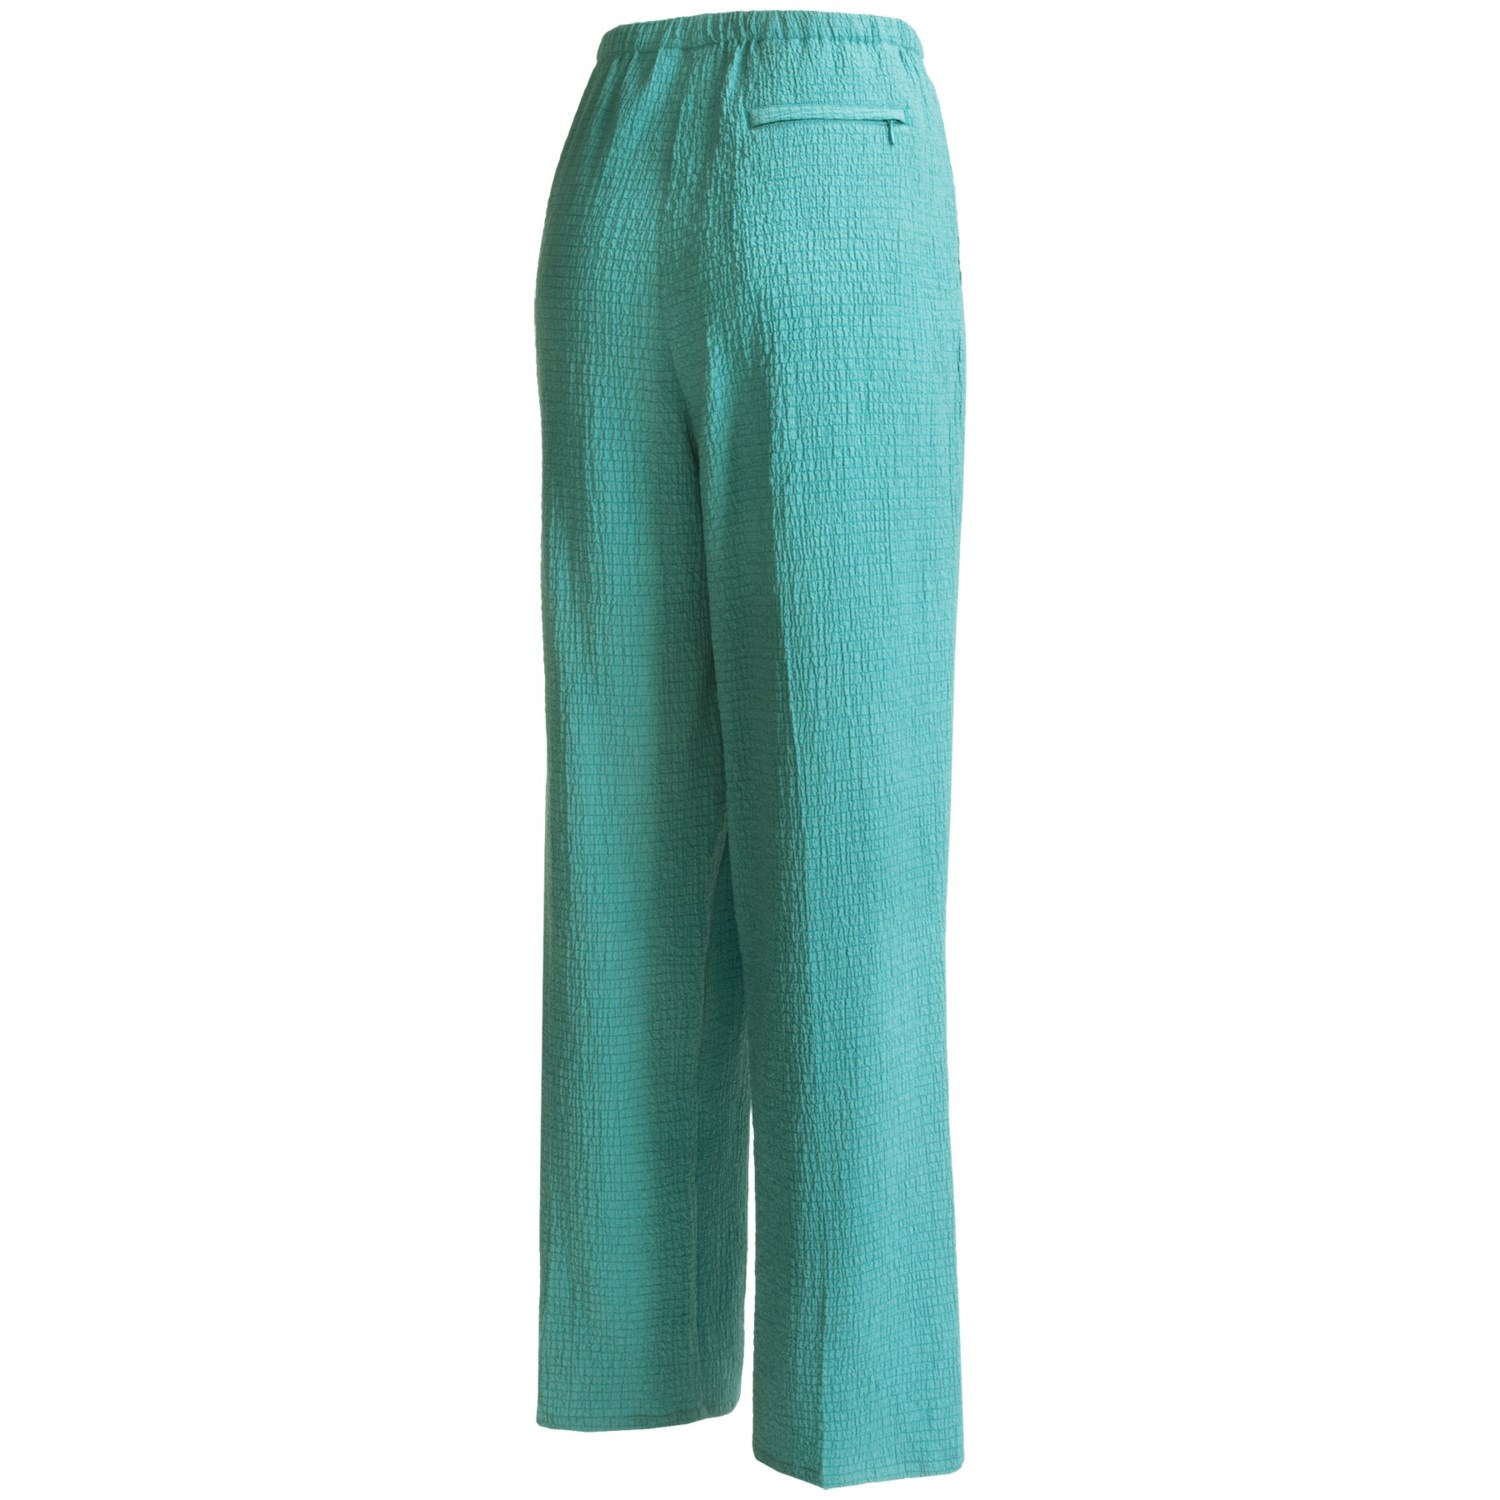 Crinkle Pants (For Women) 7057P - Save 74%